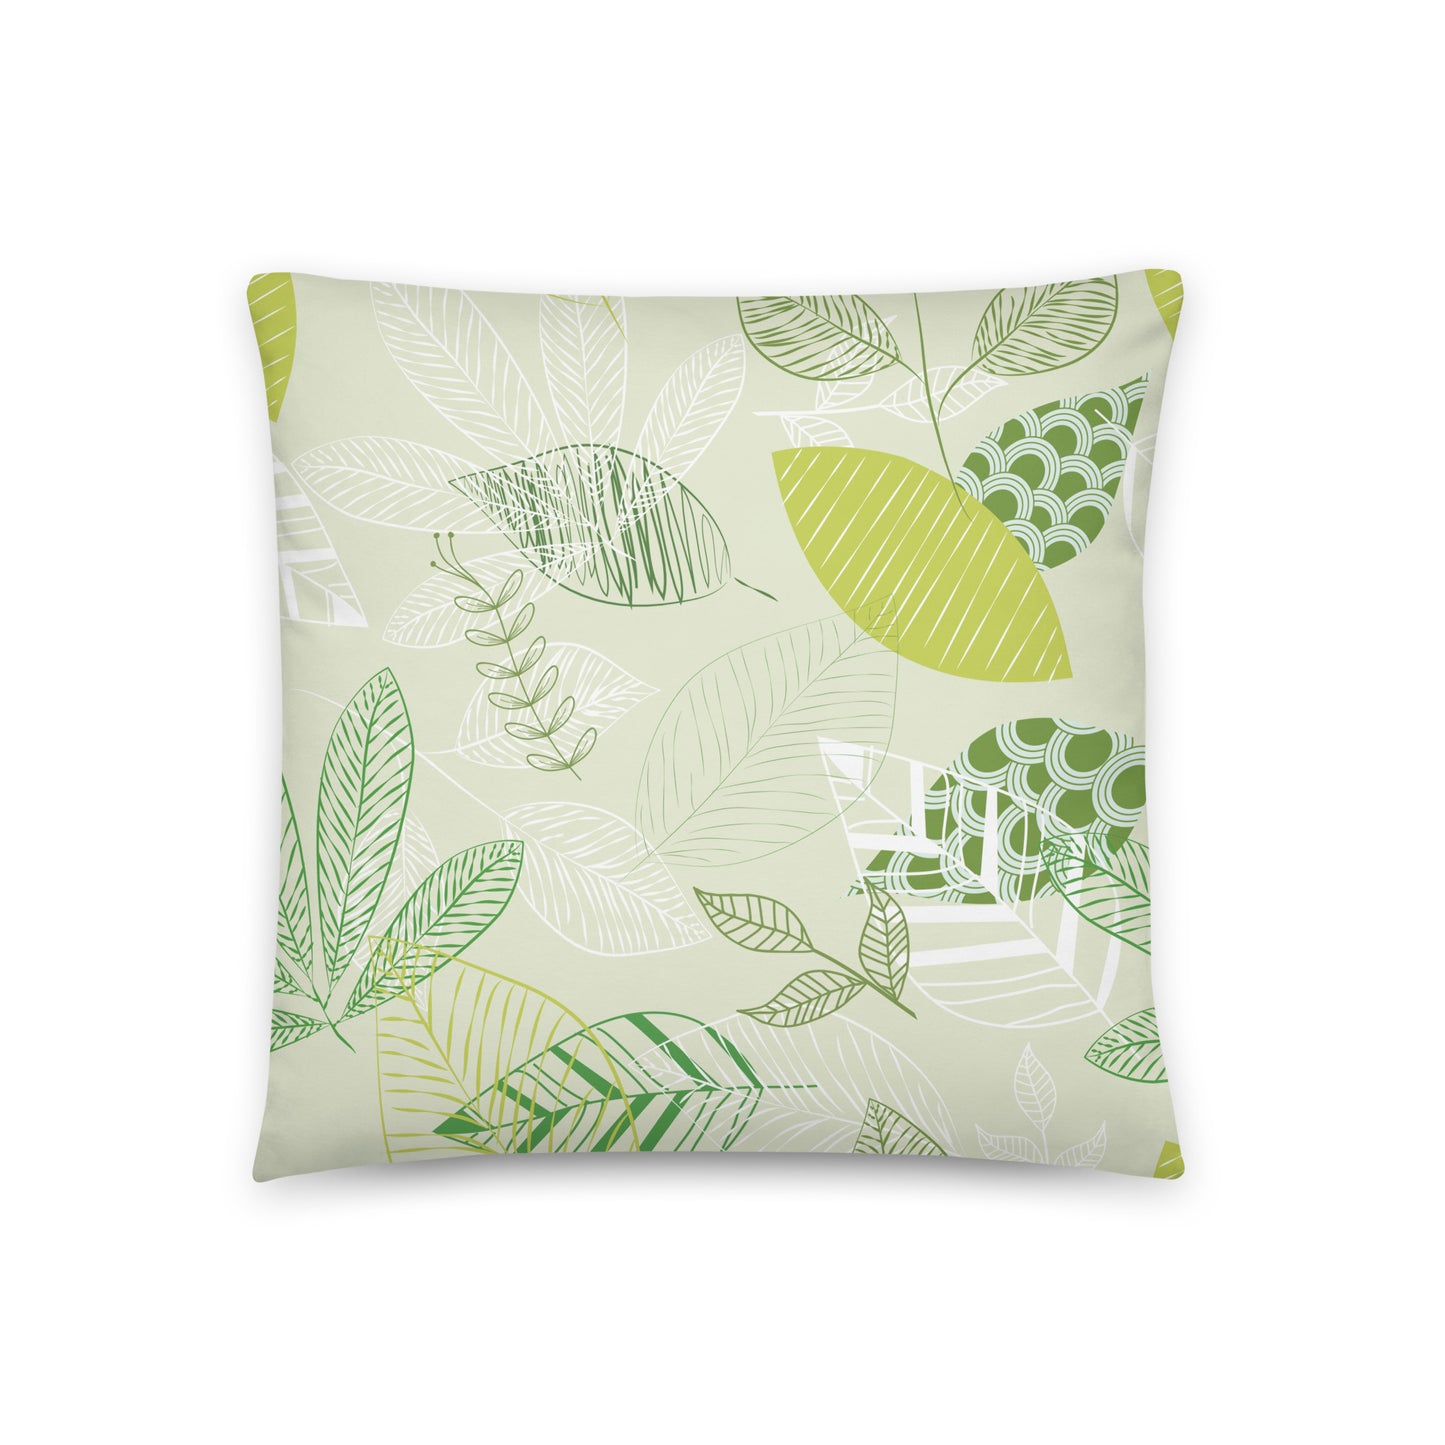 Spring Time - Sustainably Made Pillows